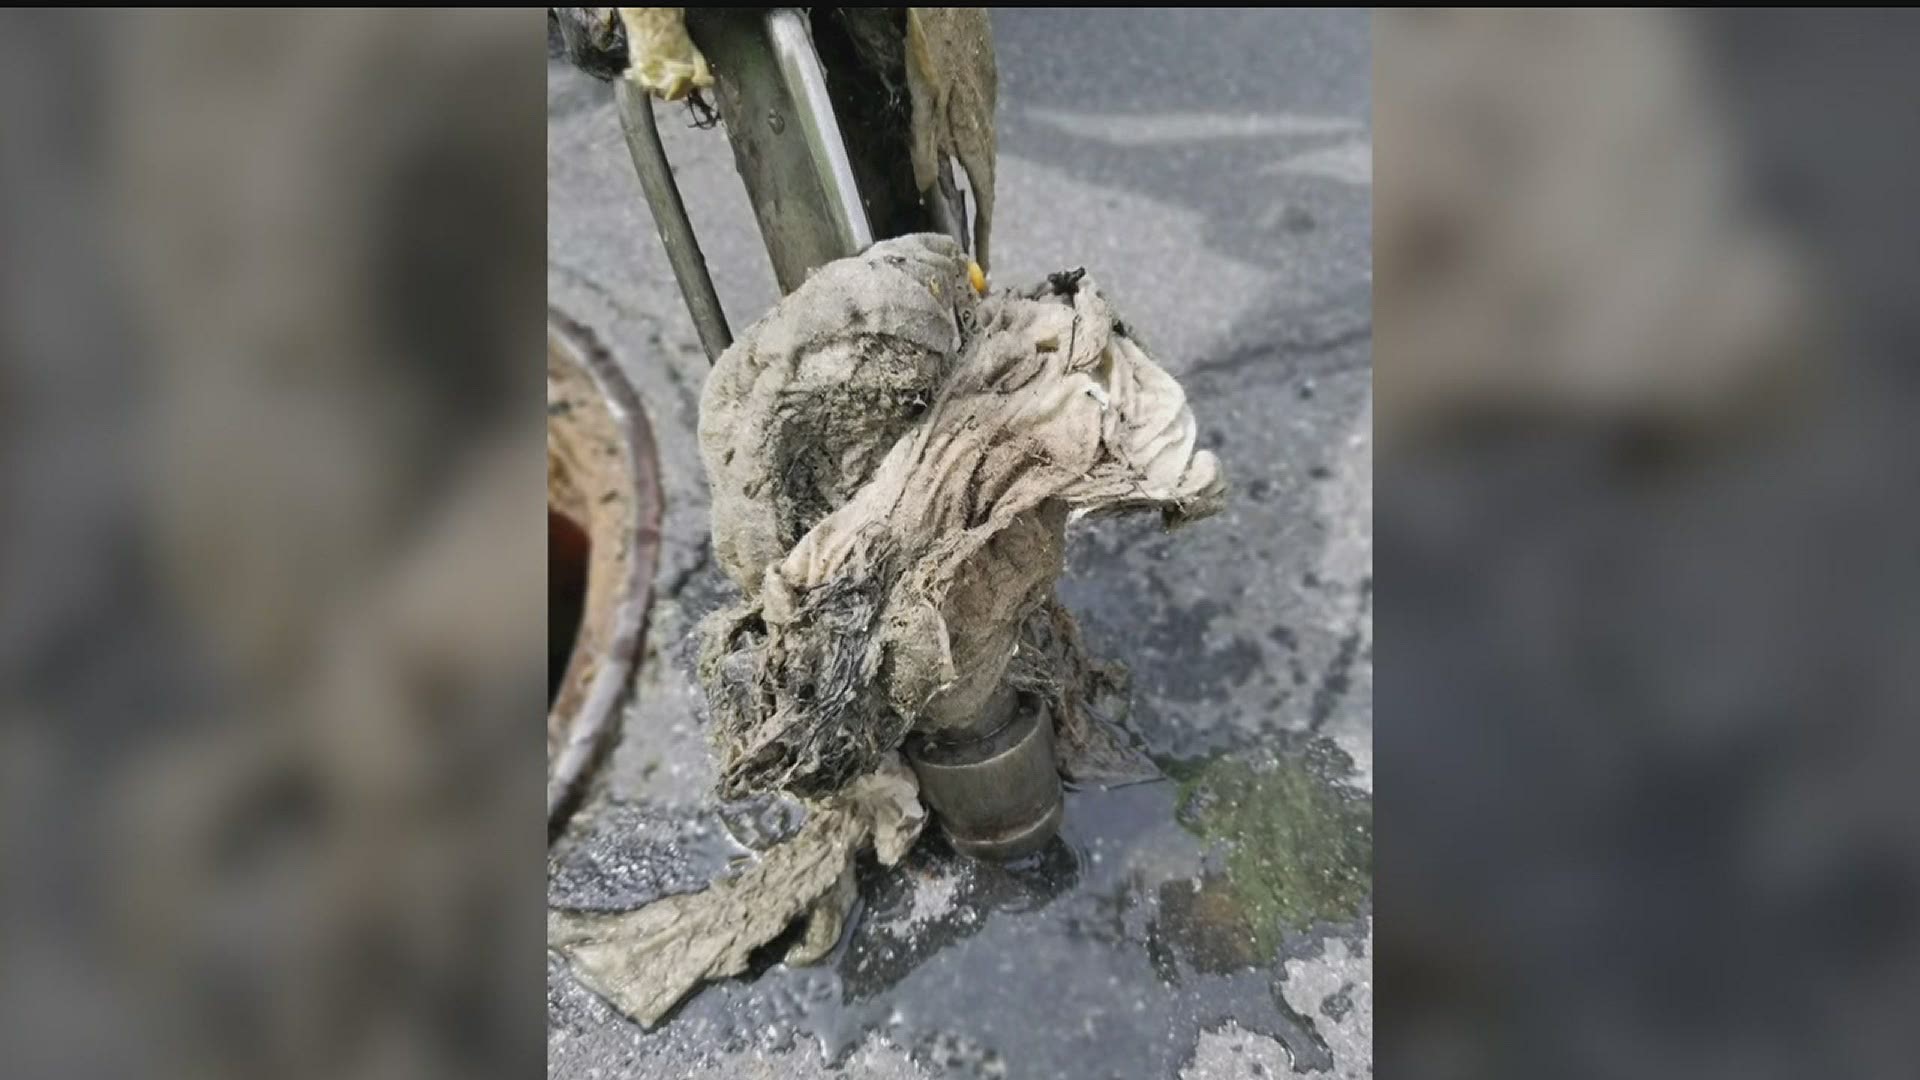 The Carlisle Department of Public Works reports the borough’s sanitary sewer system is dealing with multiple blockages due to “flushable” wipes.